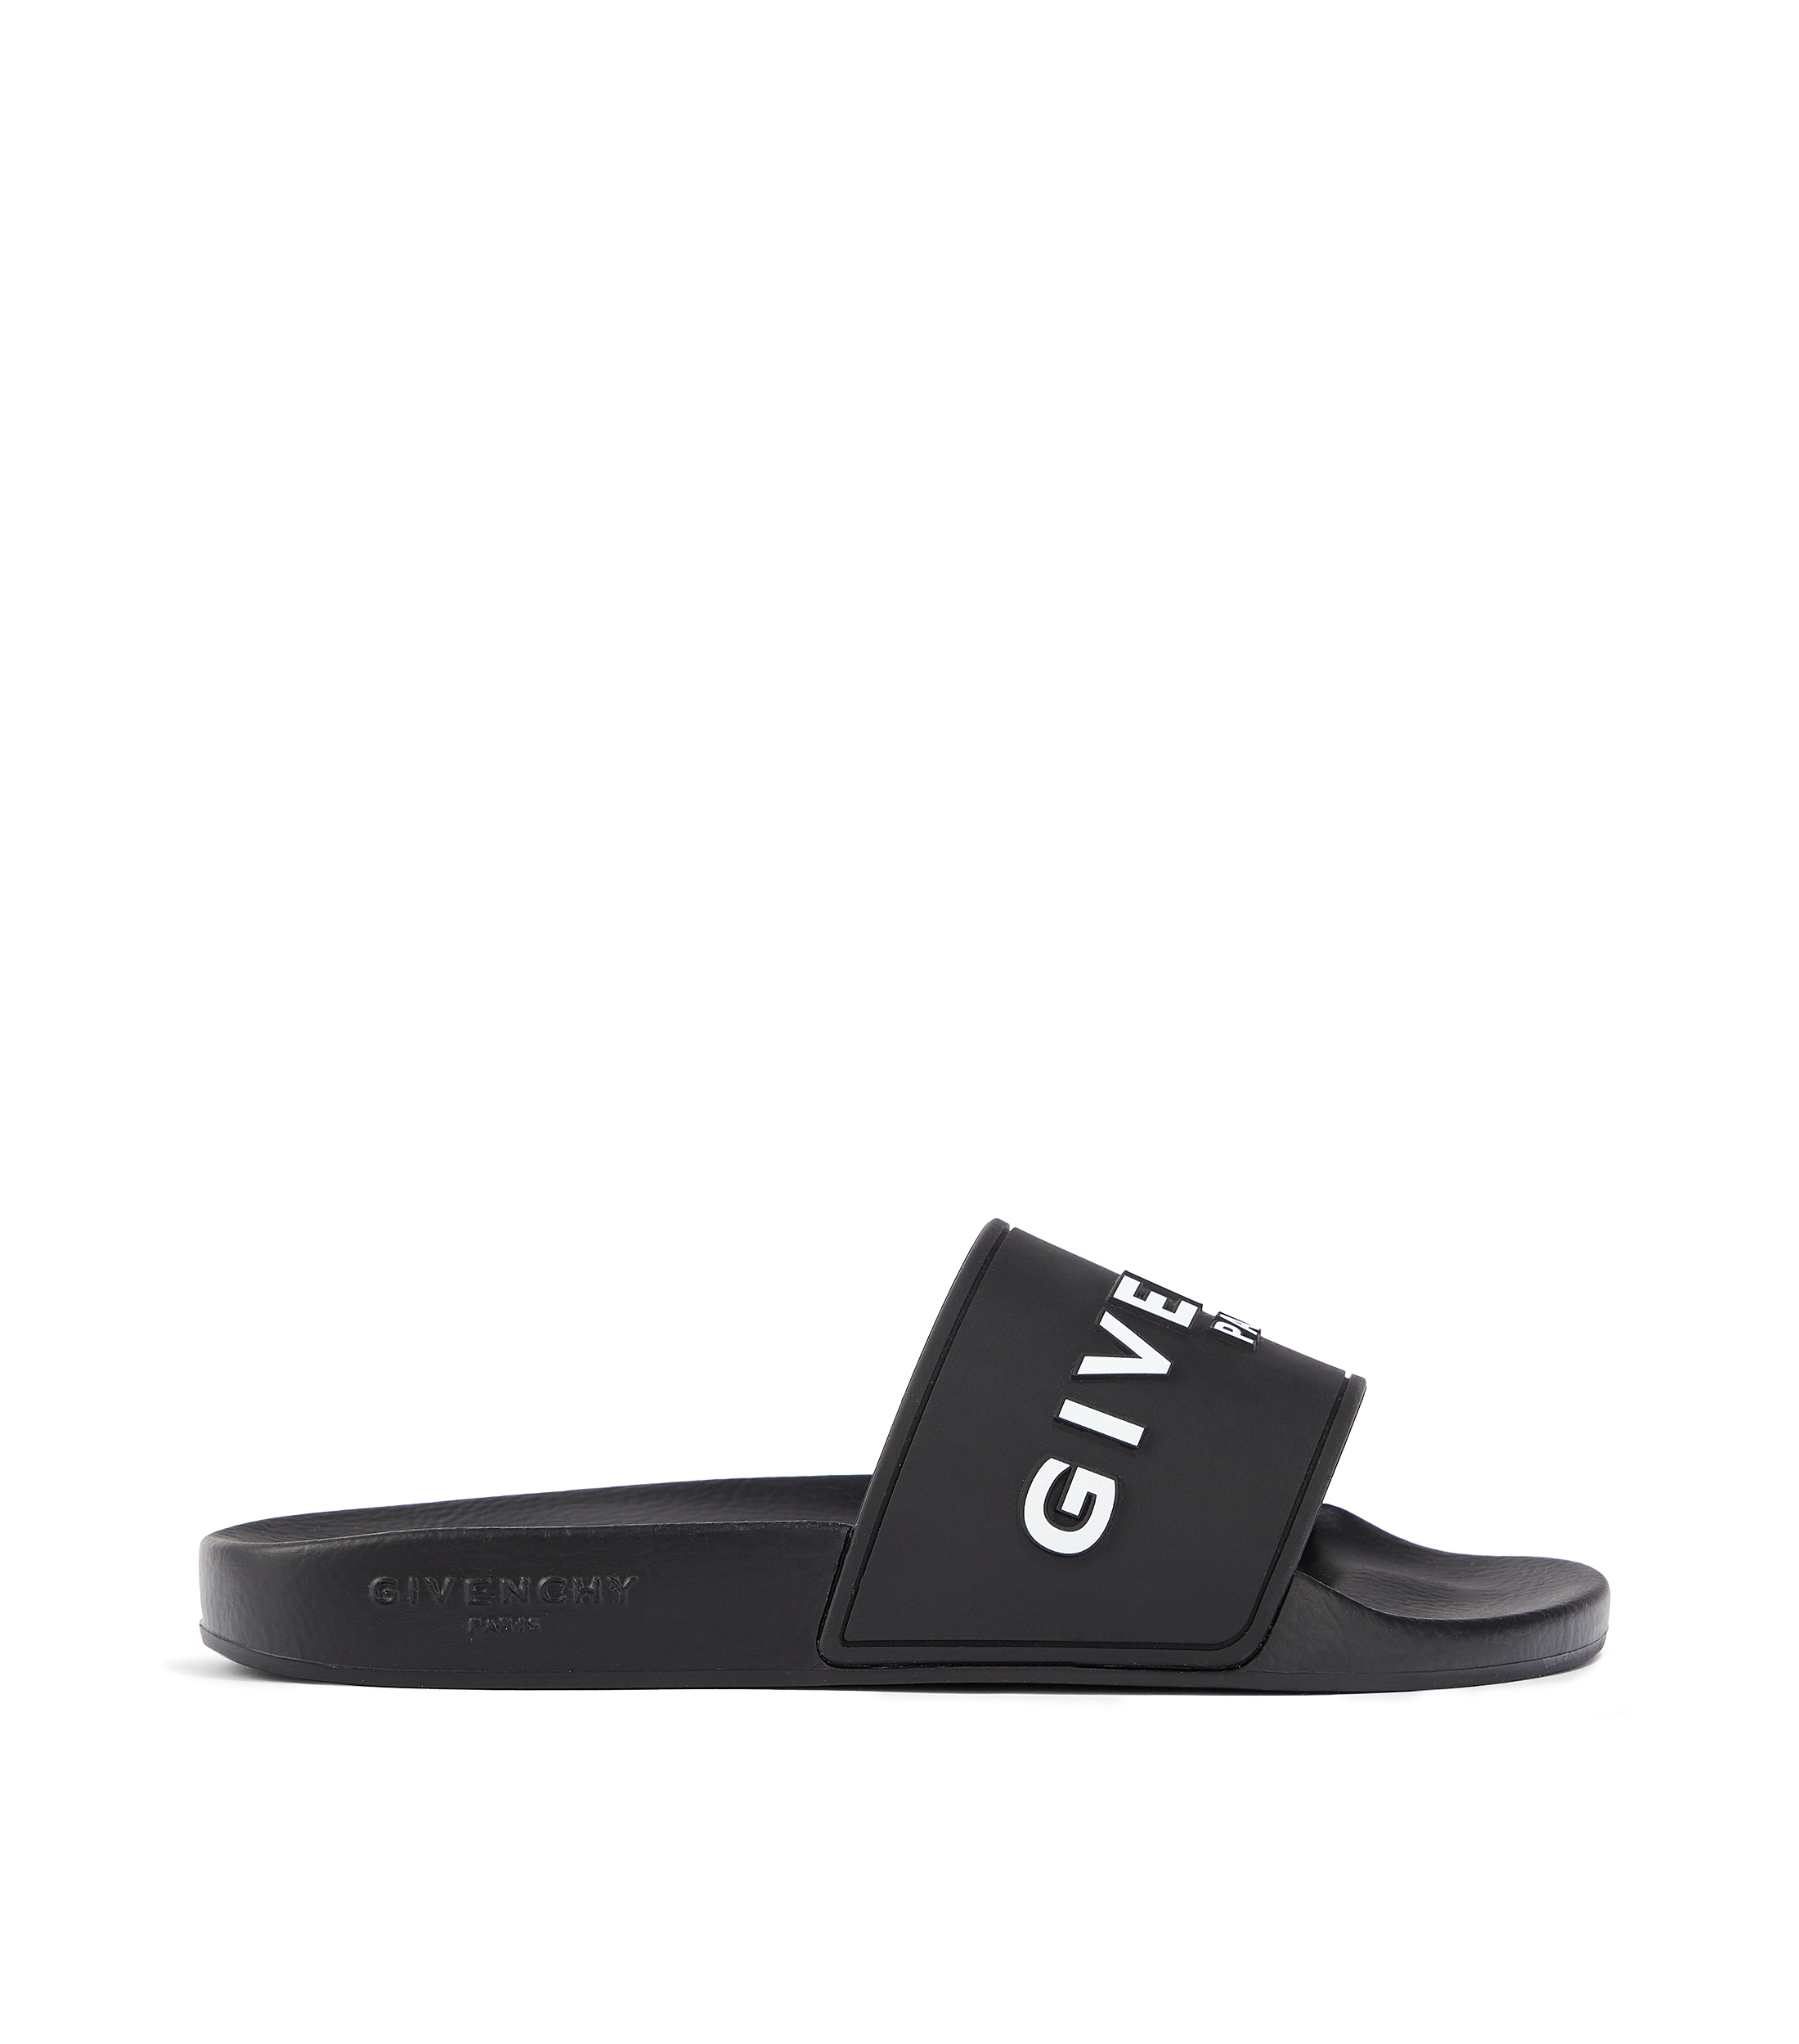 Total 87+ imagen sandalias givenchy mujer